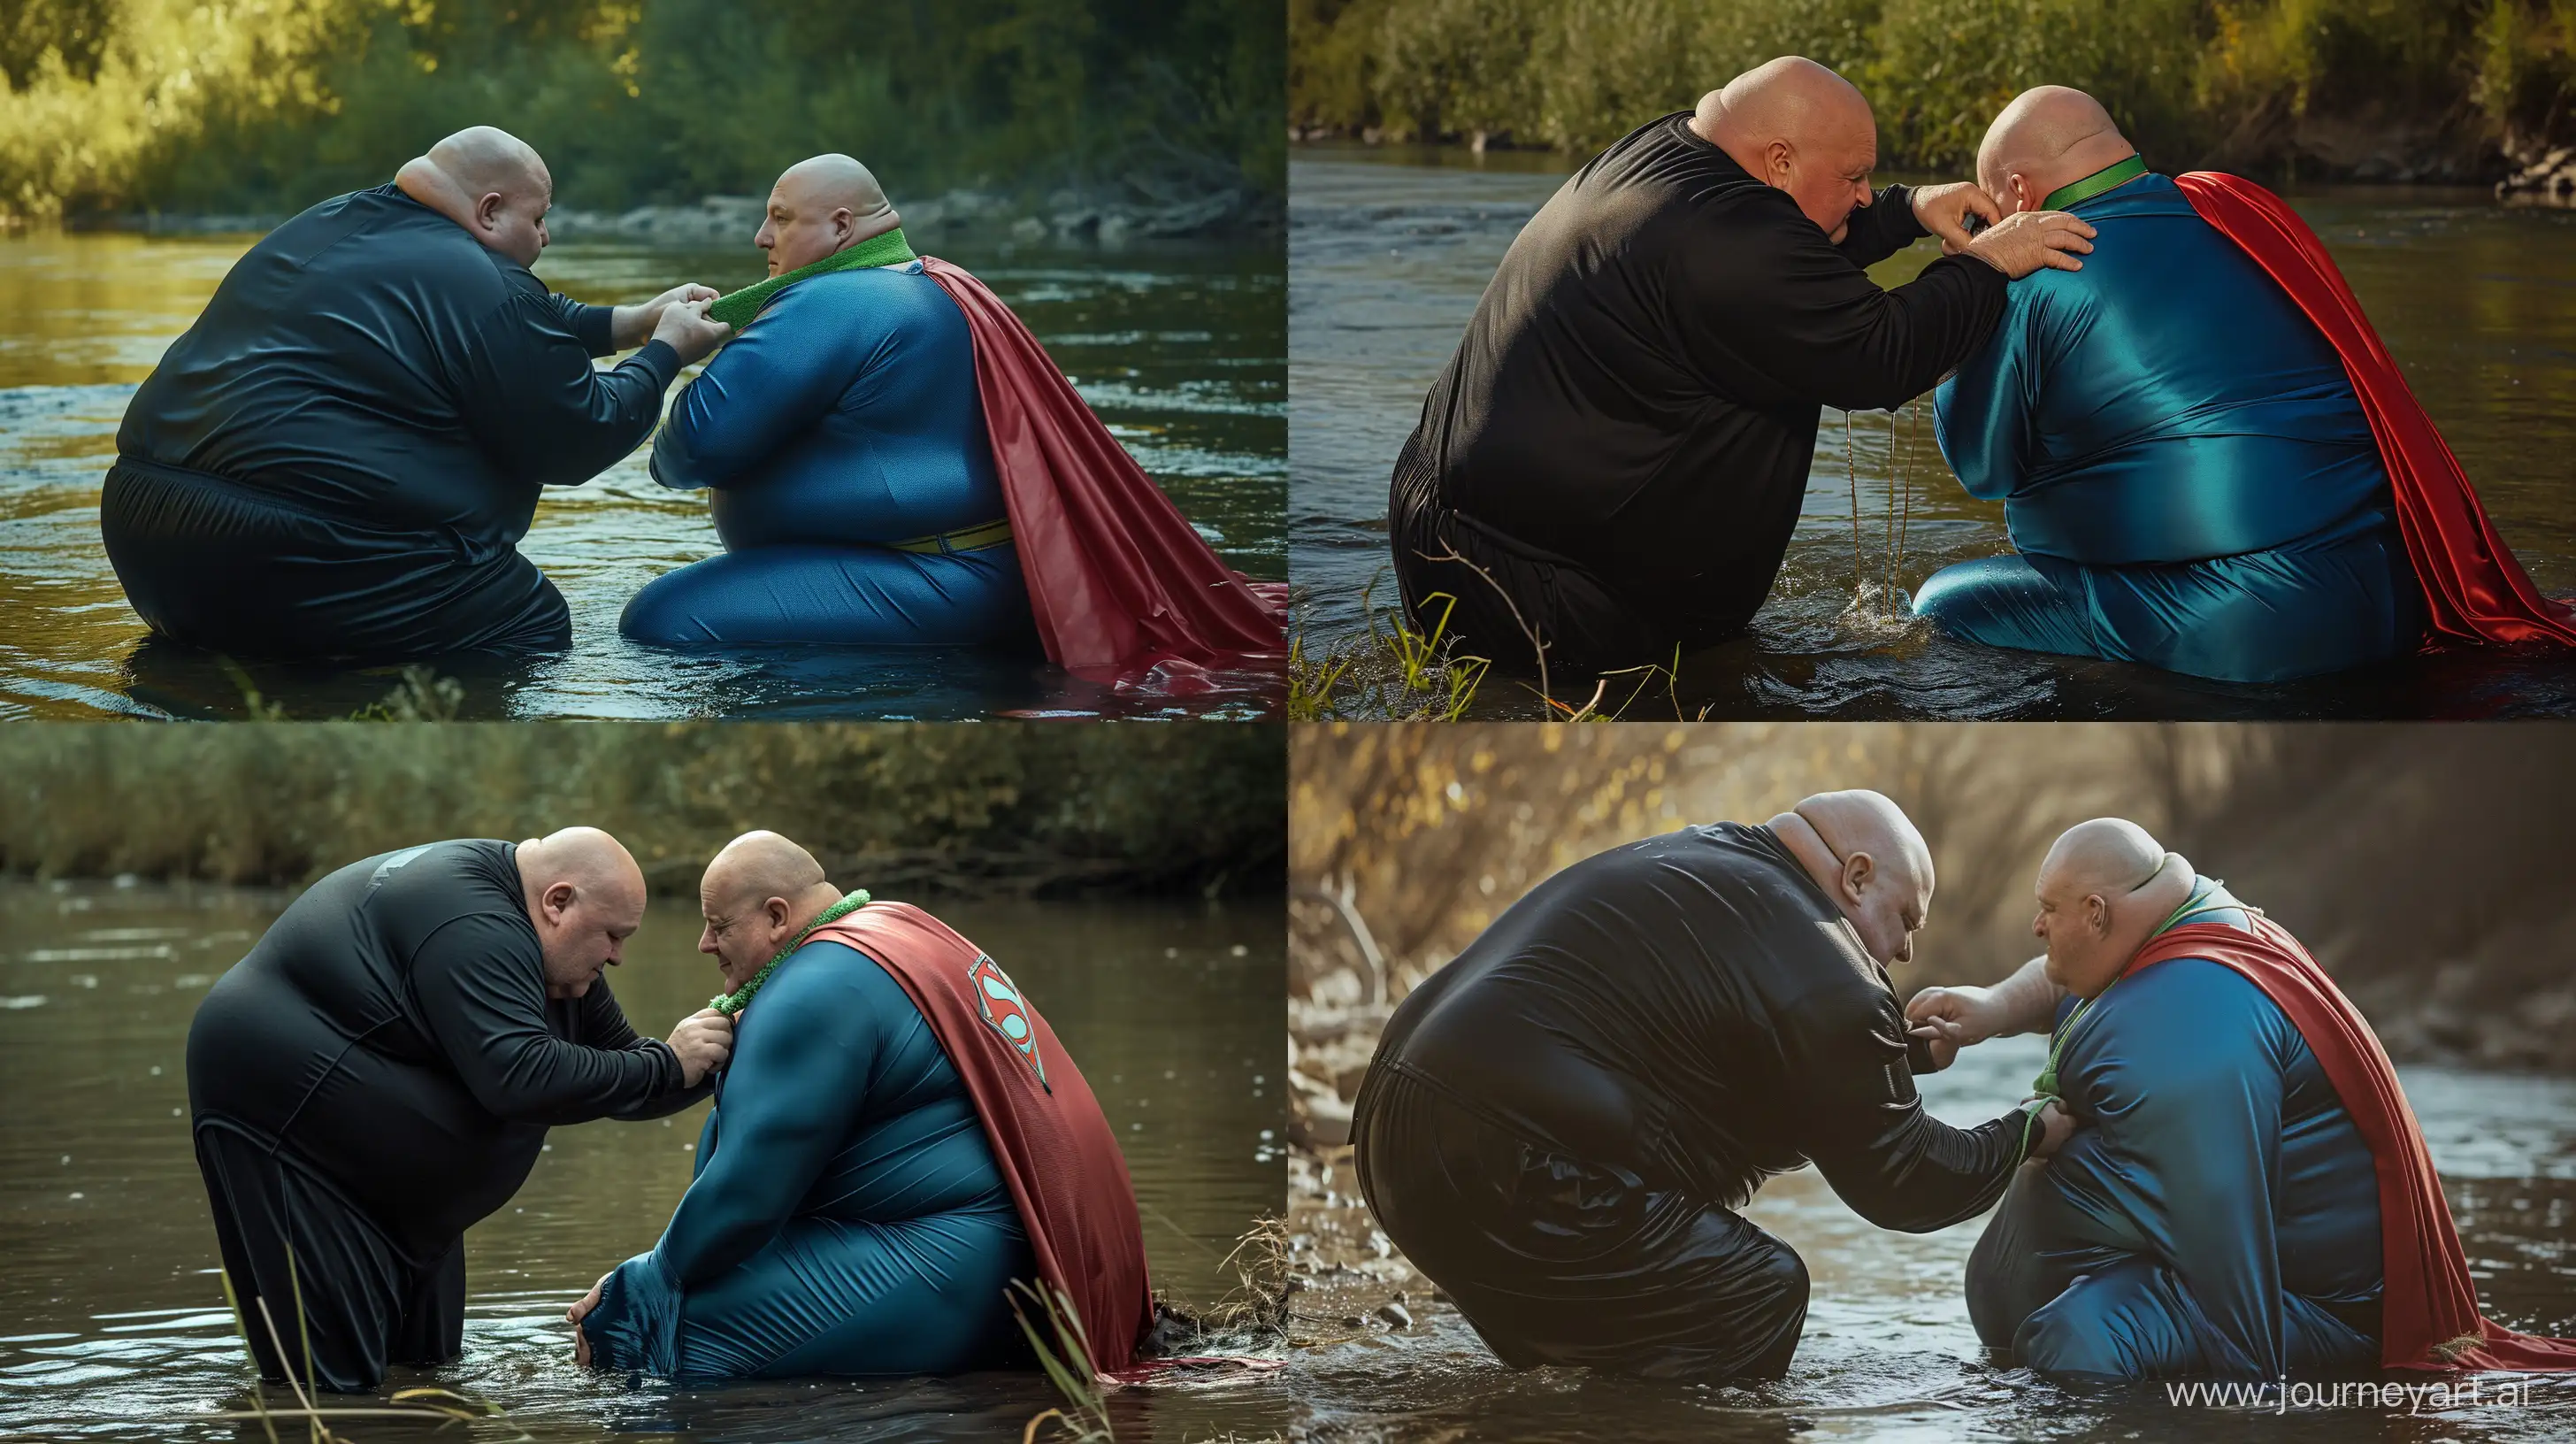 Elderly-Men-Dressing-Up-a-Dog-in-Superman-Costume-by-the-River